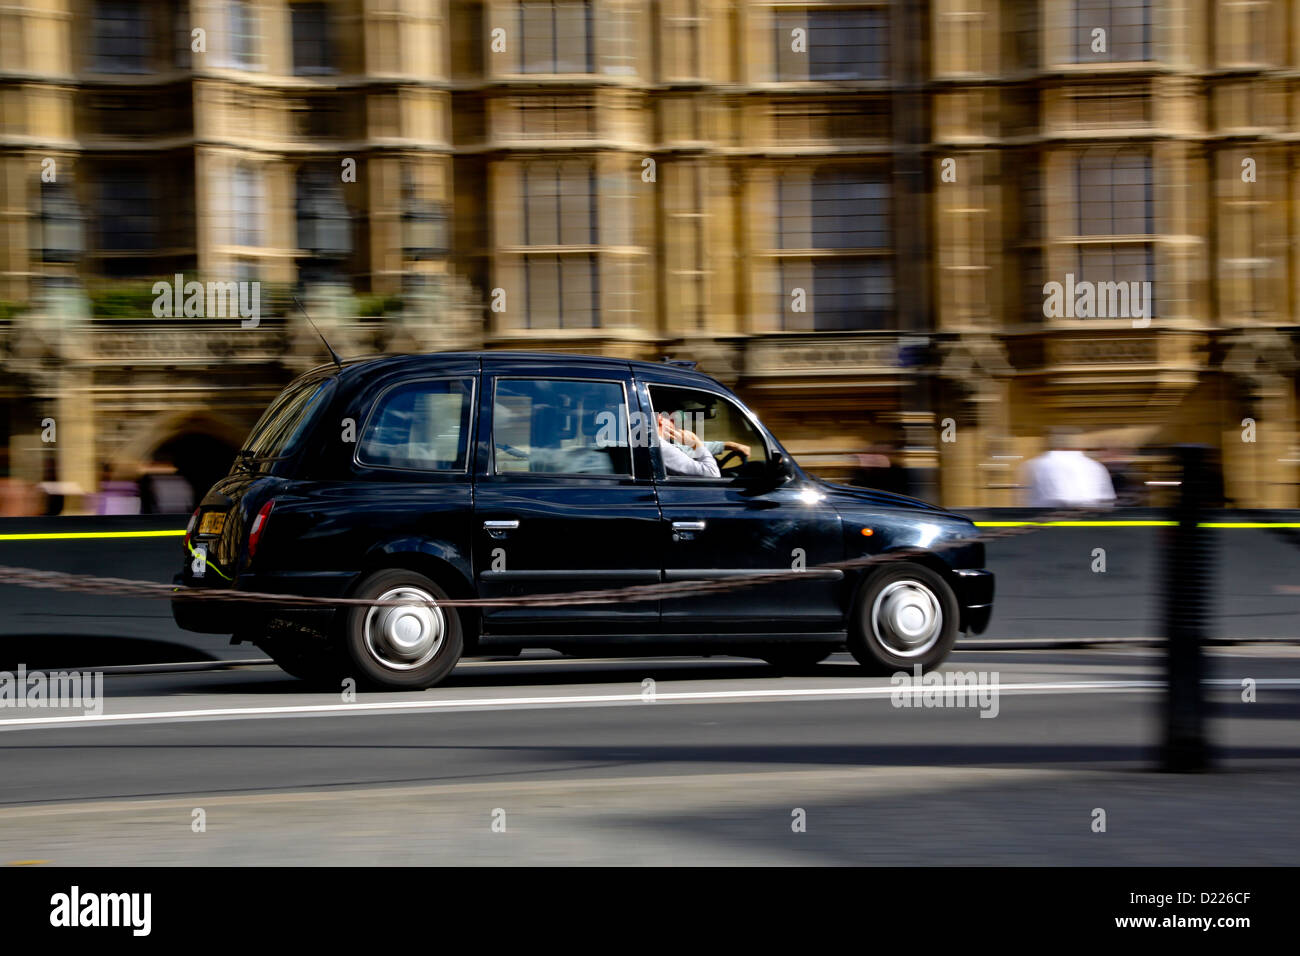 Black taxi cab passing Palace of Westminster London concept image Stock Photo